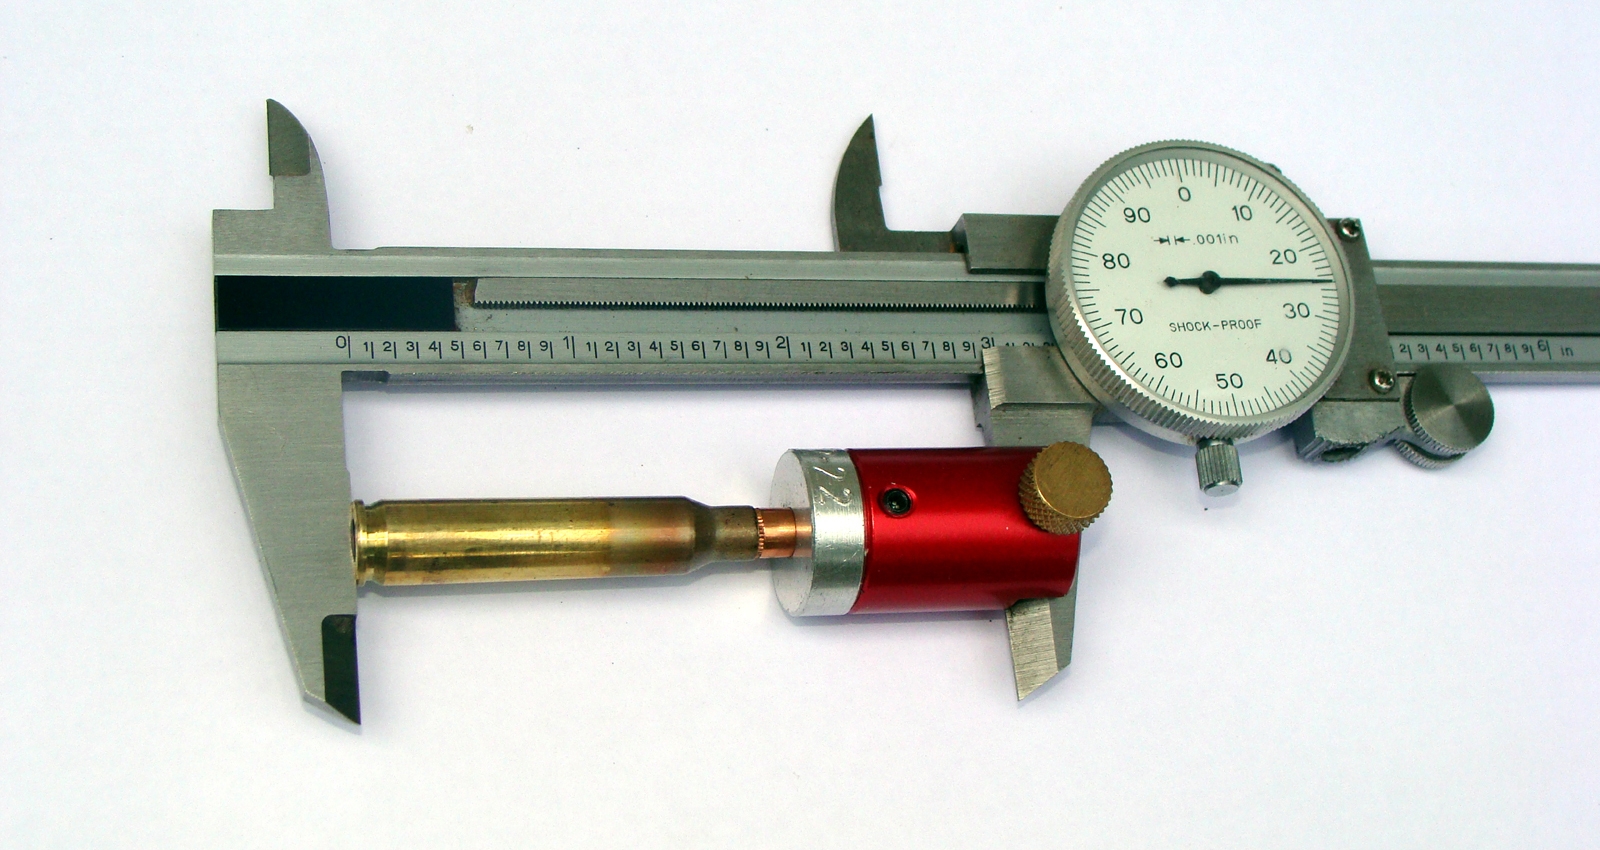 The Bullet Comparator measures from the case head to a spot on the bullet